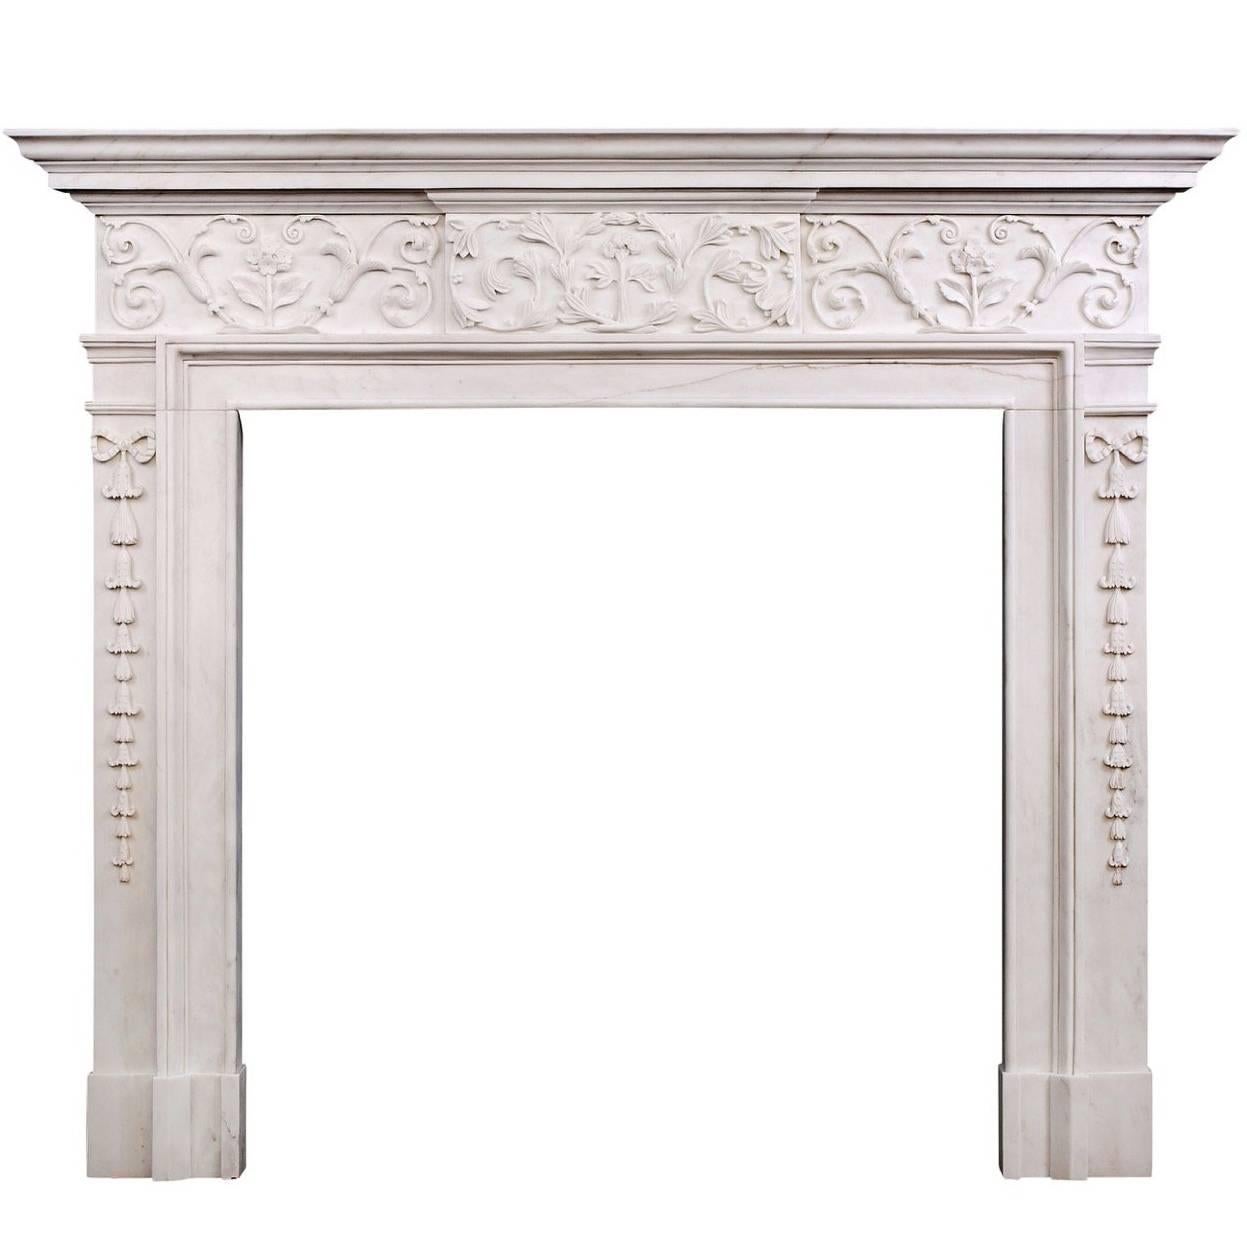 Attractive George III Style White Marble Fireplace